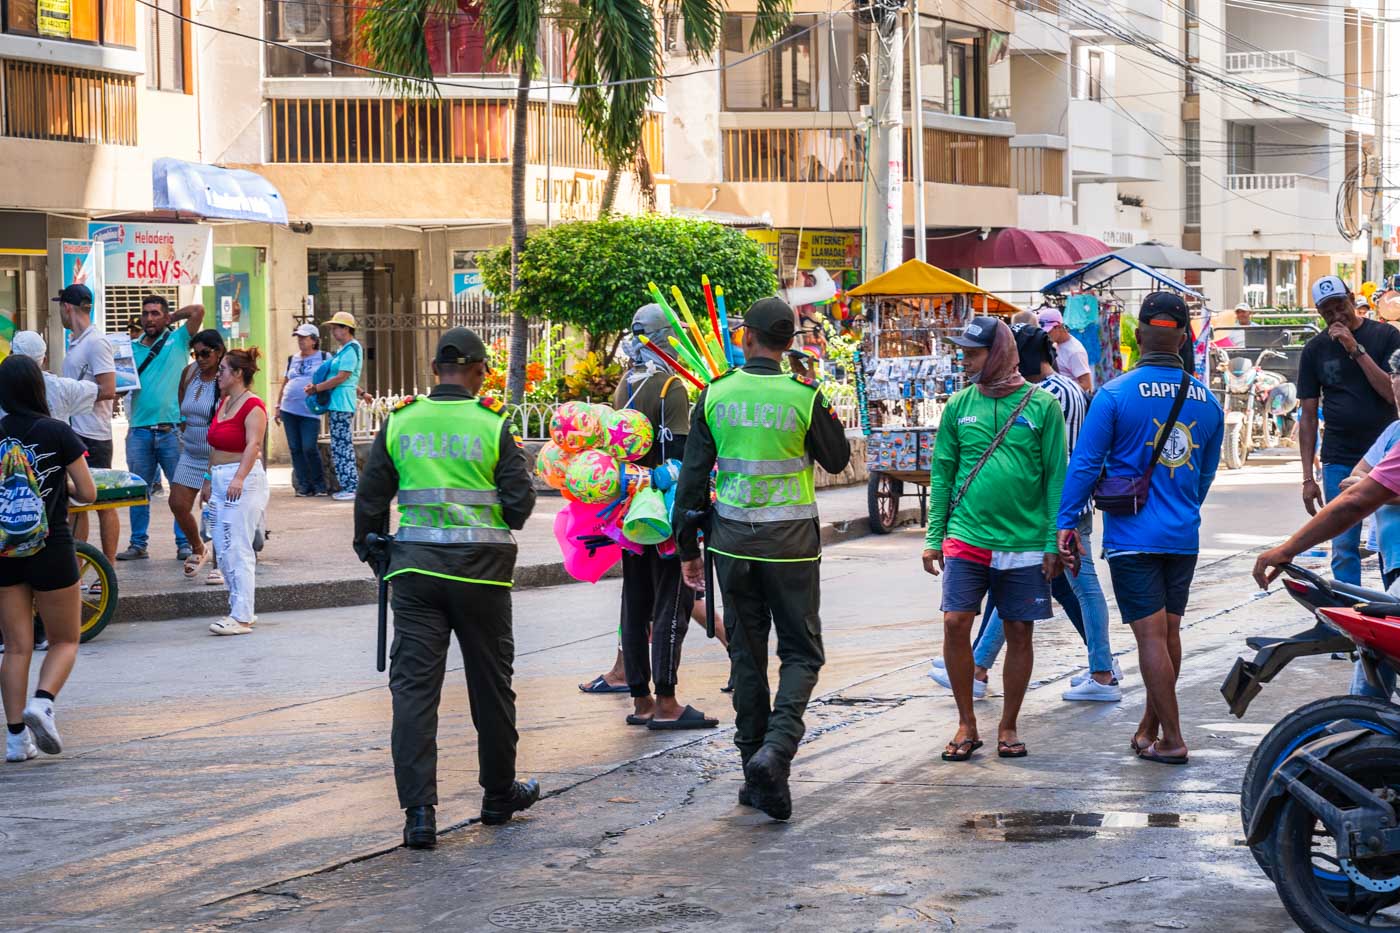 Police patrolling the streets surrounded by tourists and vendors in the town of Rodadero.